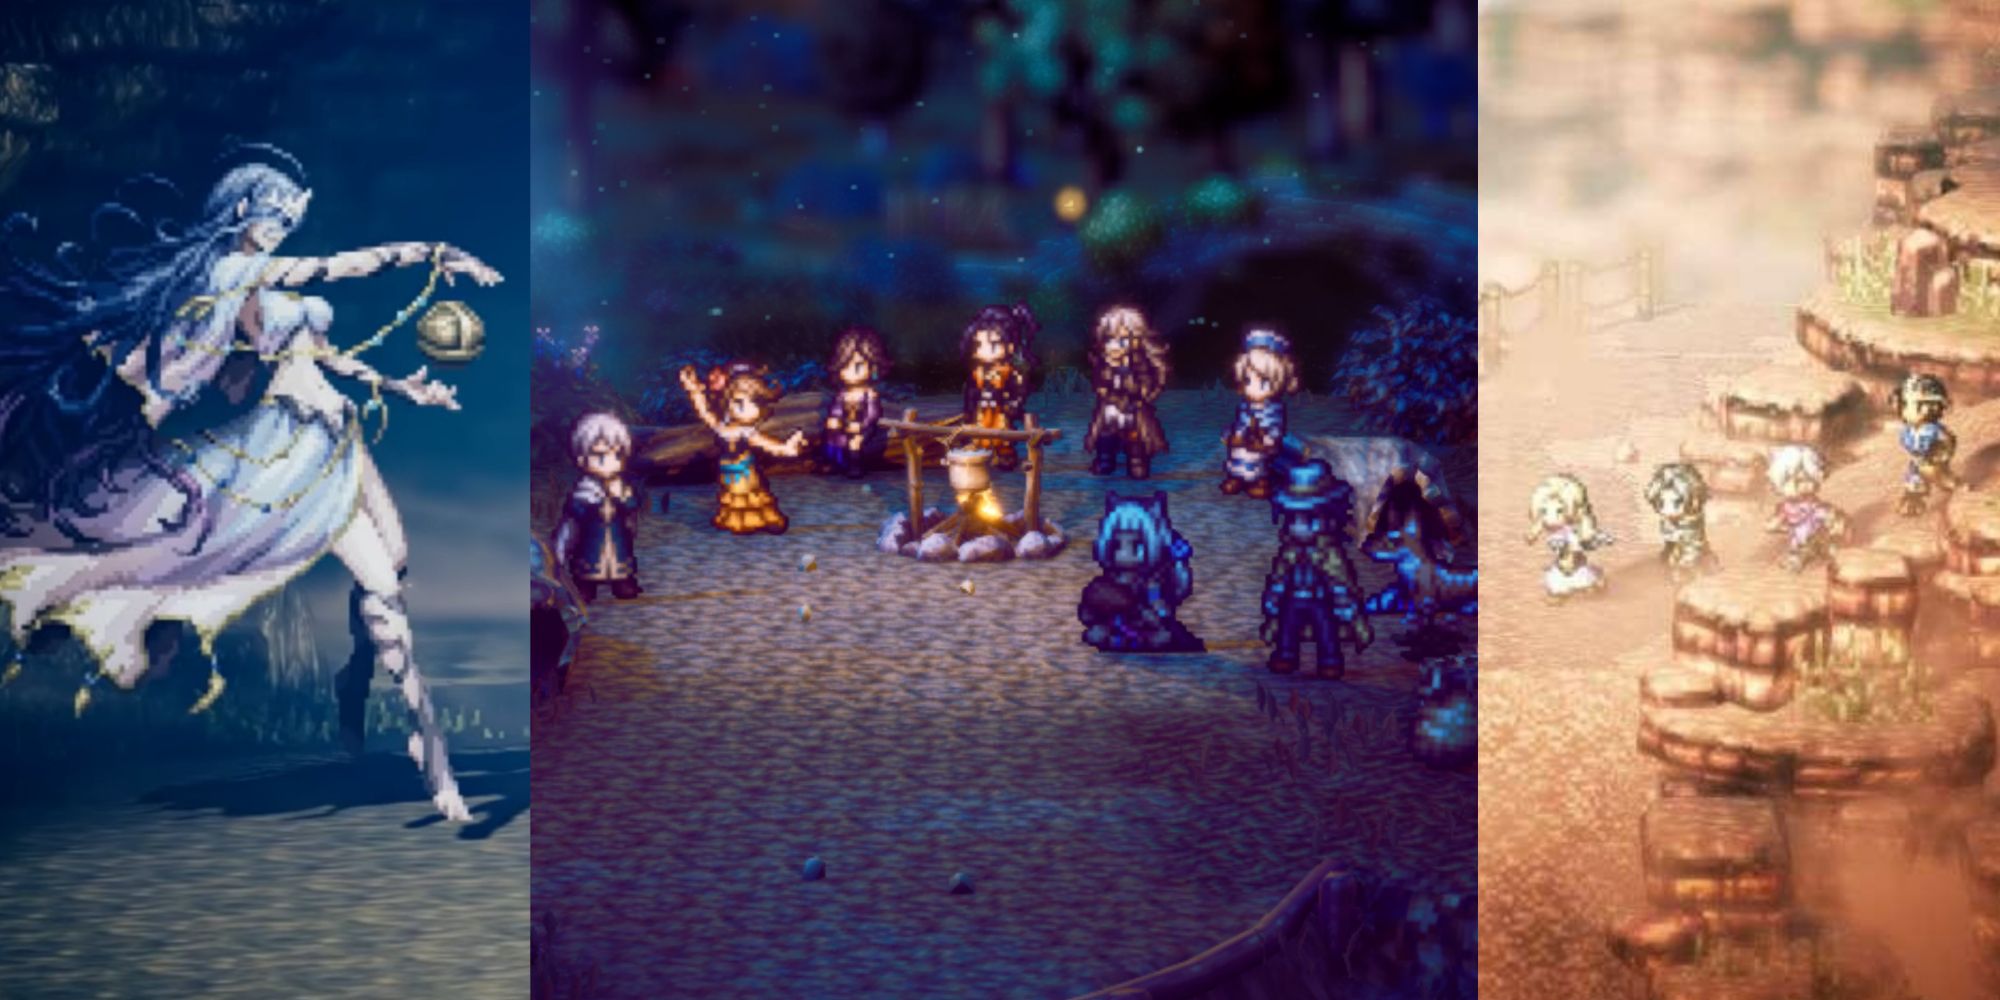 Collage Image of Octopath Traveler and Octopath Traveler 2